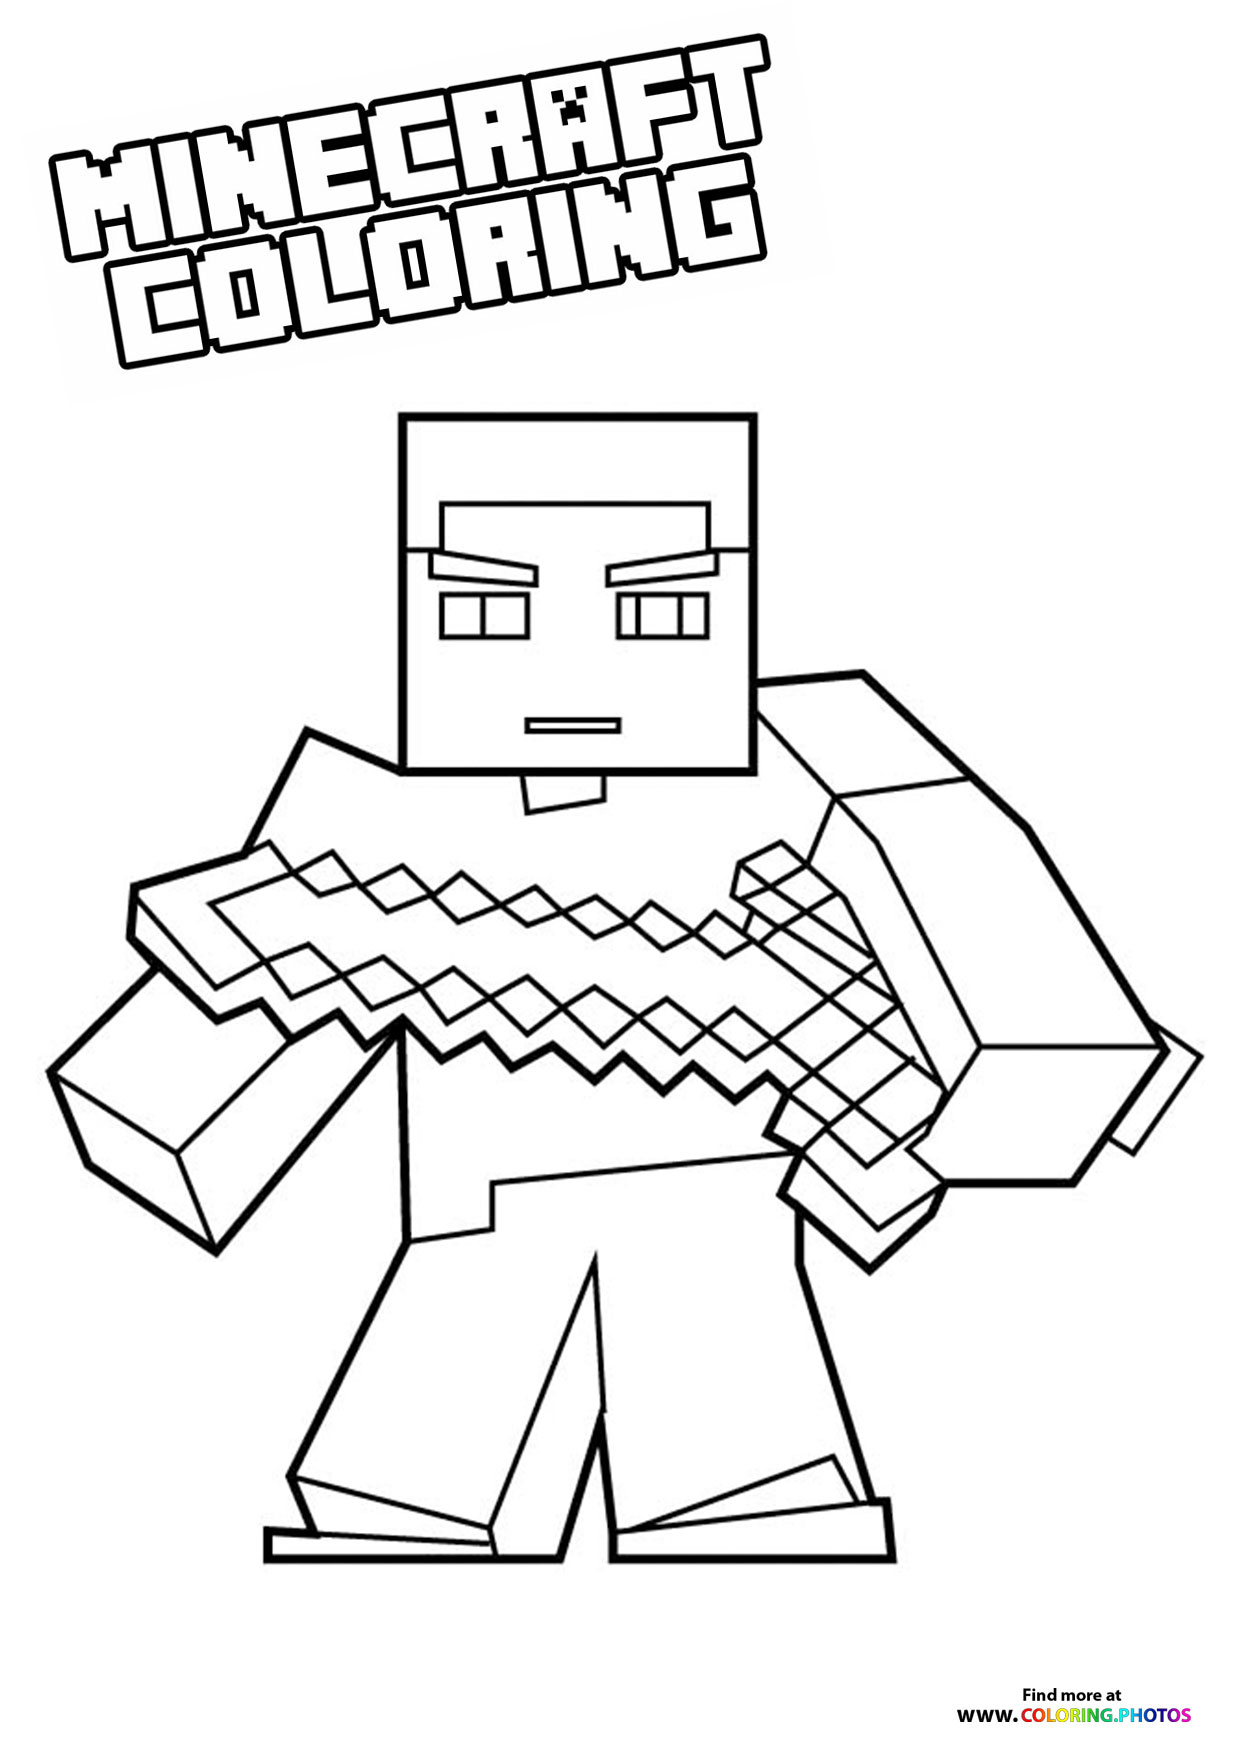 Minecraft Steve with a sword looking good Coloring Pages for kids